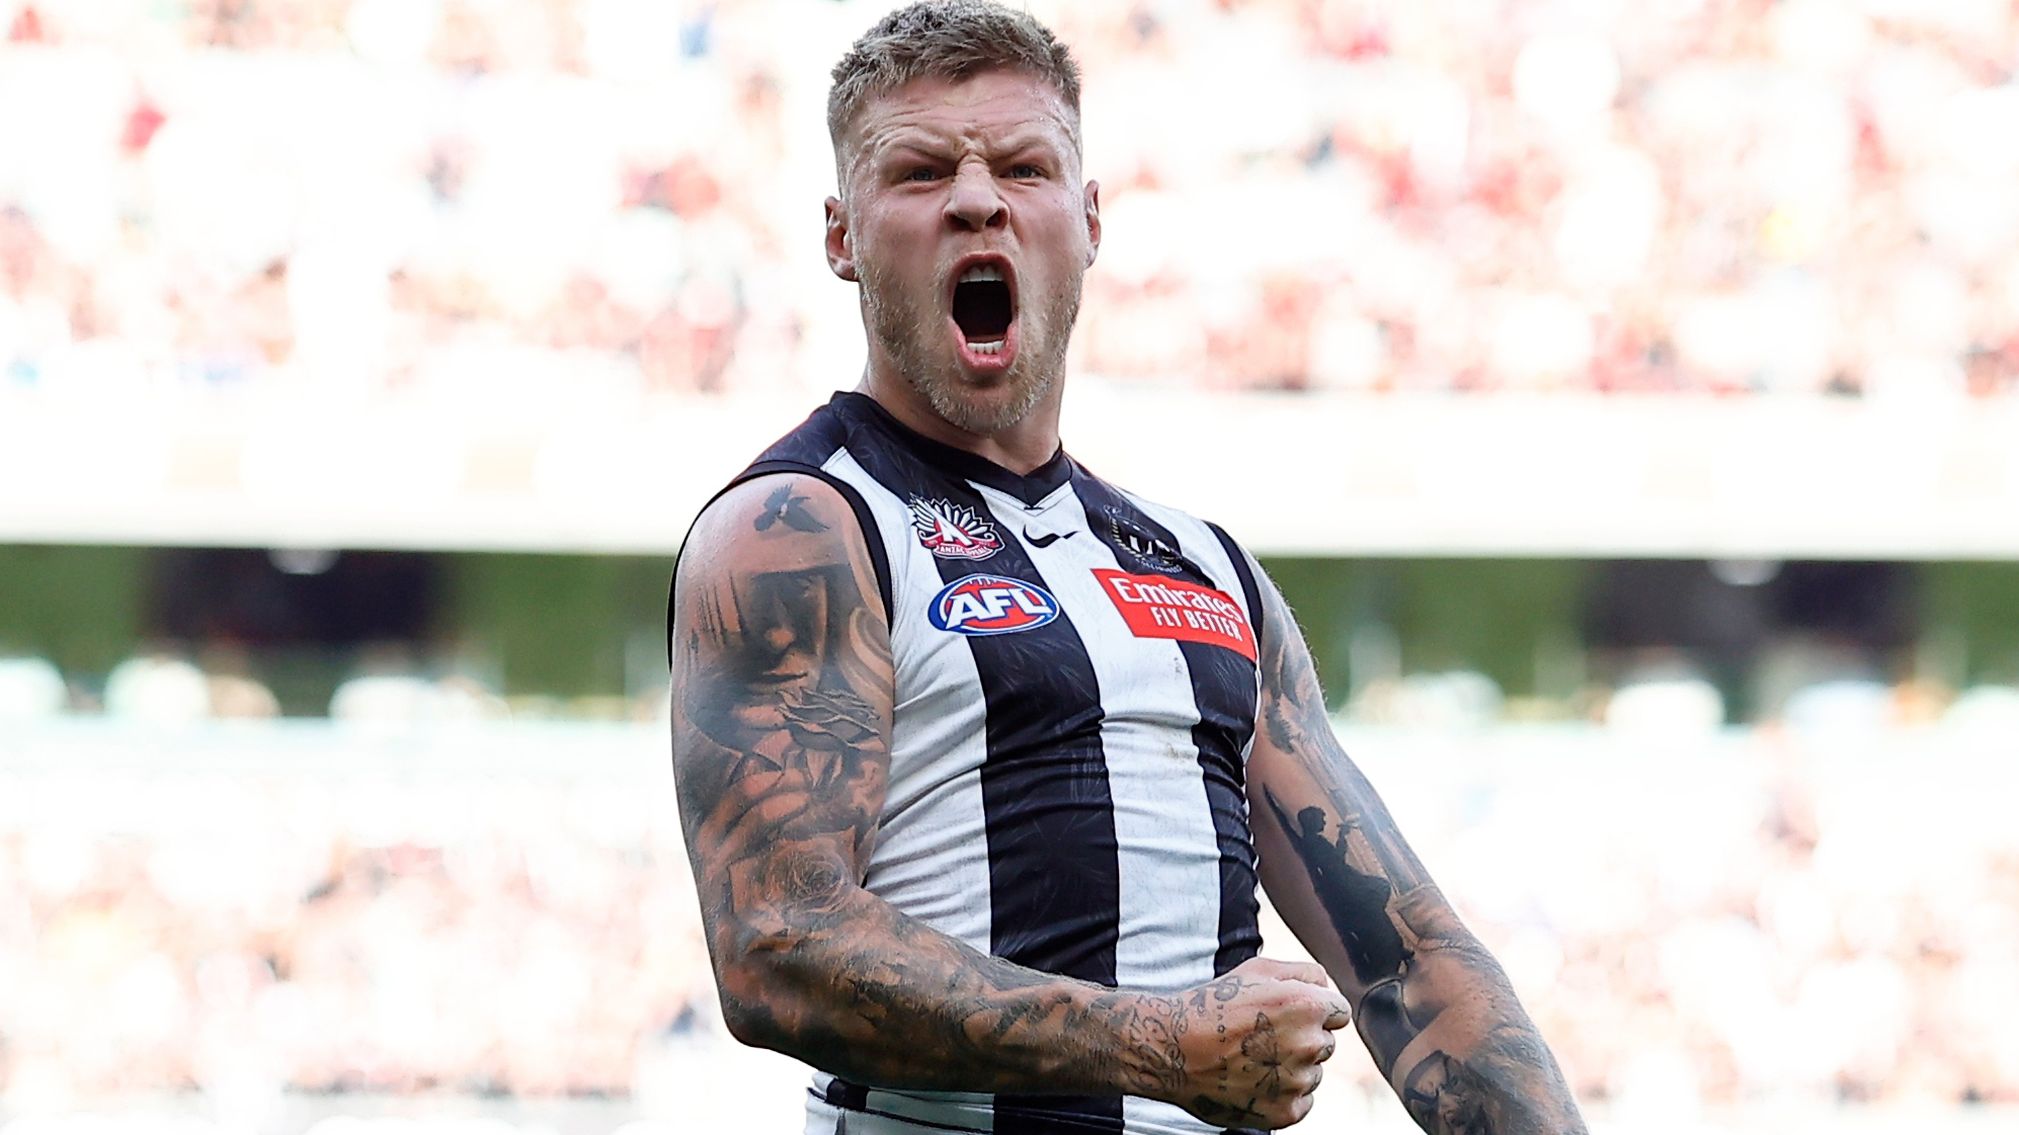 MELBOURNE, AUSTRALIA - APRIL 25: Jordan De Goey of the Magpies celebrates a goal during the 2023 AFL Round 06 match between the Collingwood Magpies and the Essendon Bombers at the Melbourne Cricket Ground on April 25, 2023 in Melbourne, Australia. (Photo by Dylan Burns/AFL Photos)